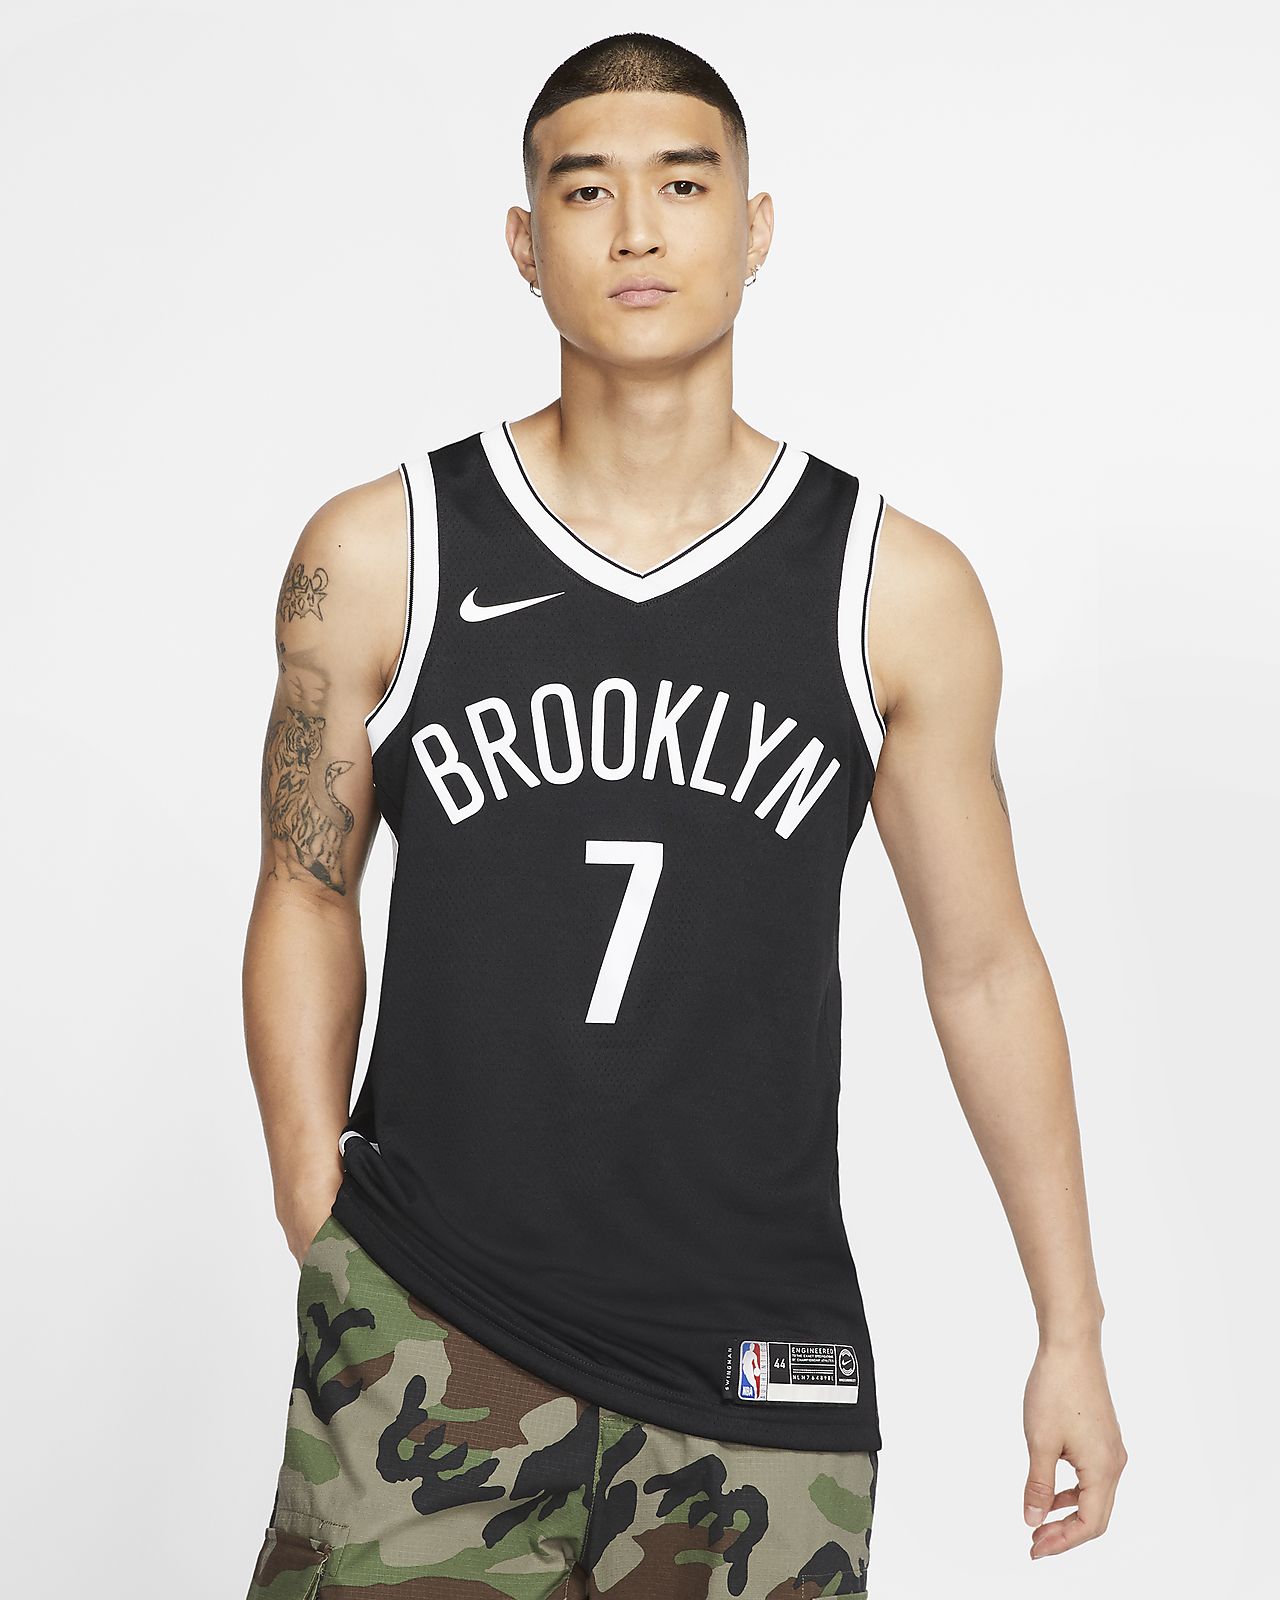 nets icon jersey